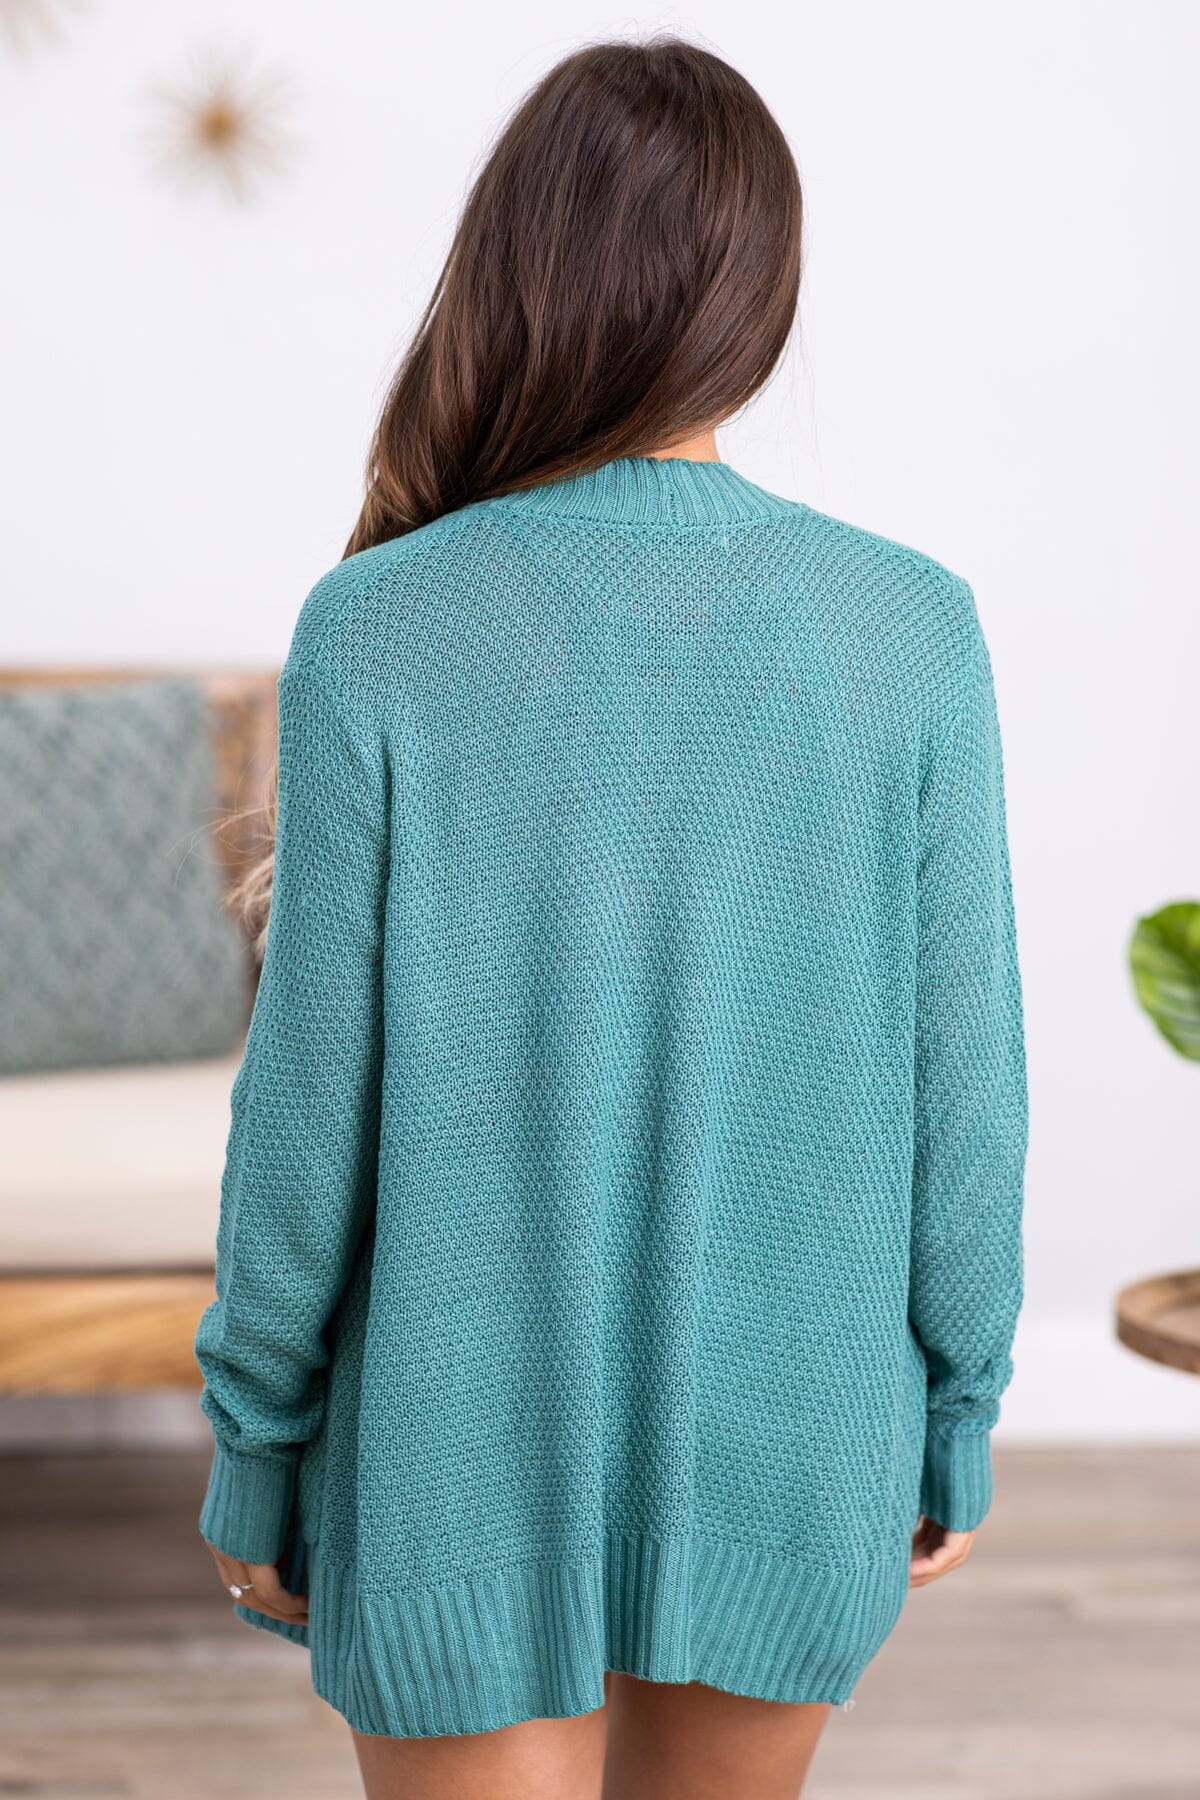 Turquoise Waffle Knit Cardigan With Rib Trim - Filly Flair